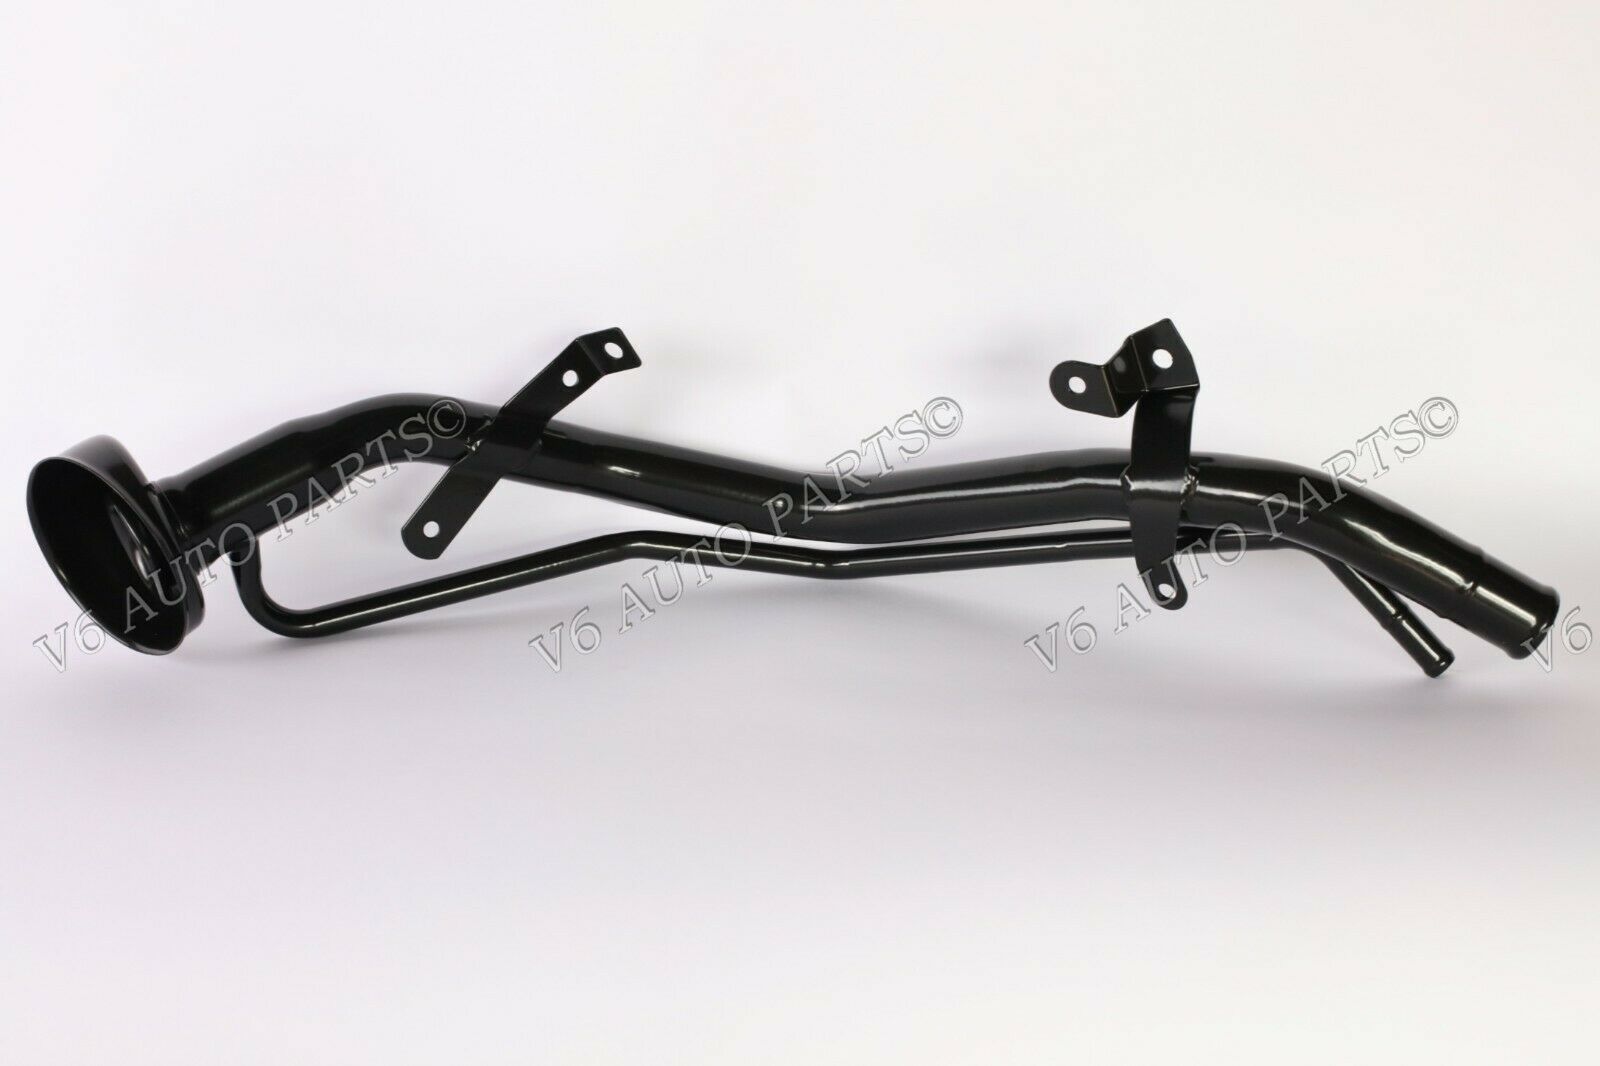 B075D255XD MICRA K11 NEW 1993 TO 2002 1.0 1.3 MARCH PETROL FUEL TANK FILLER NECK METAL PIPE